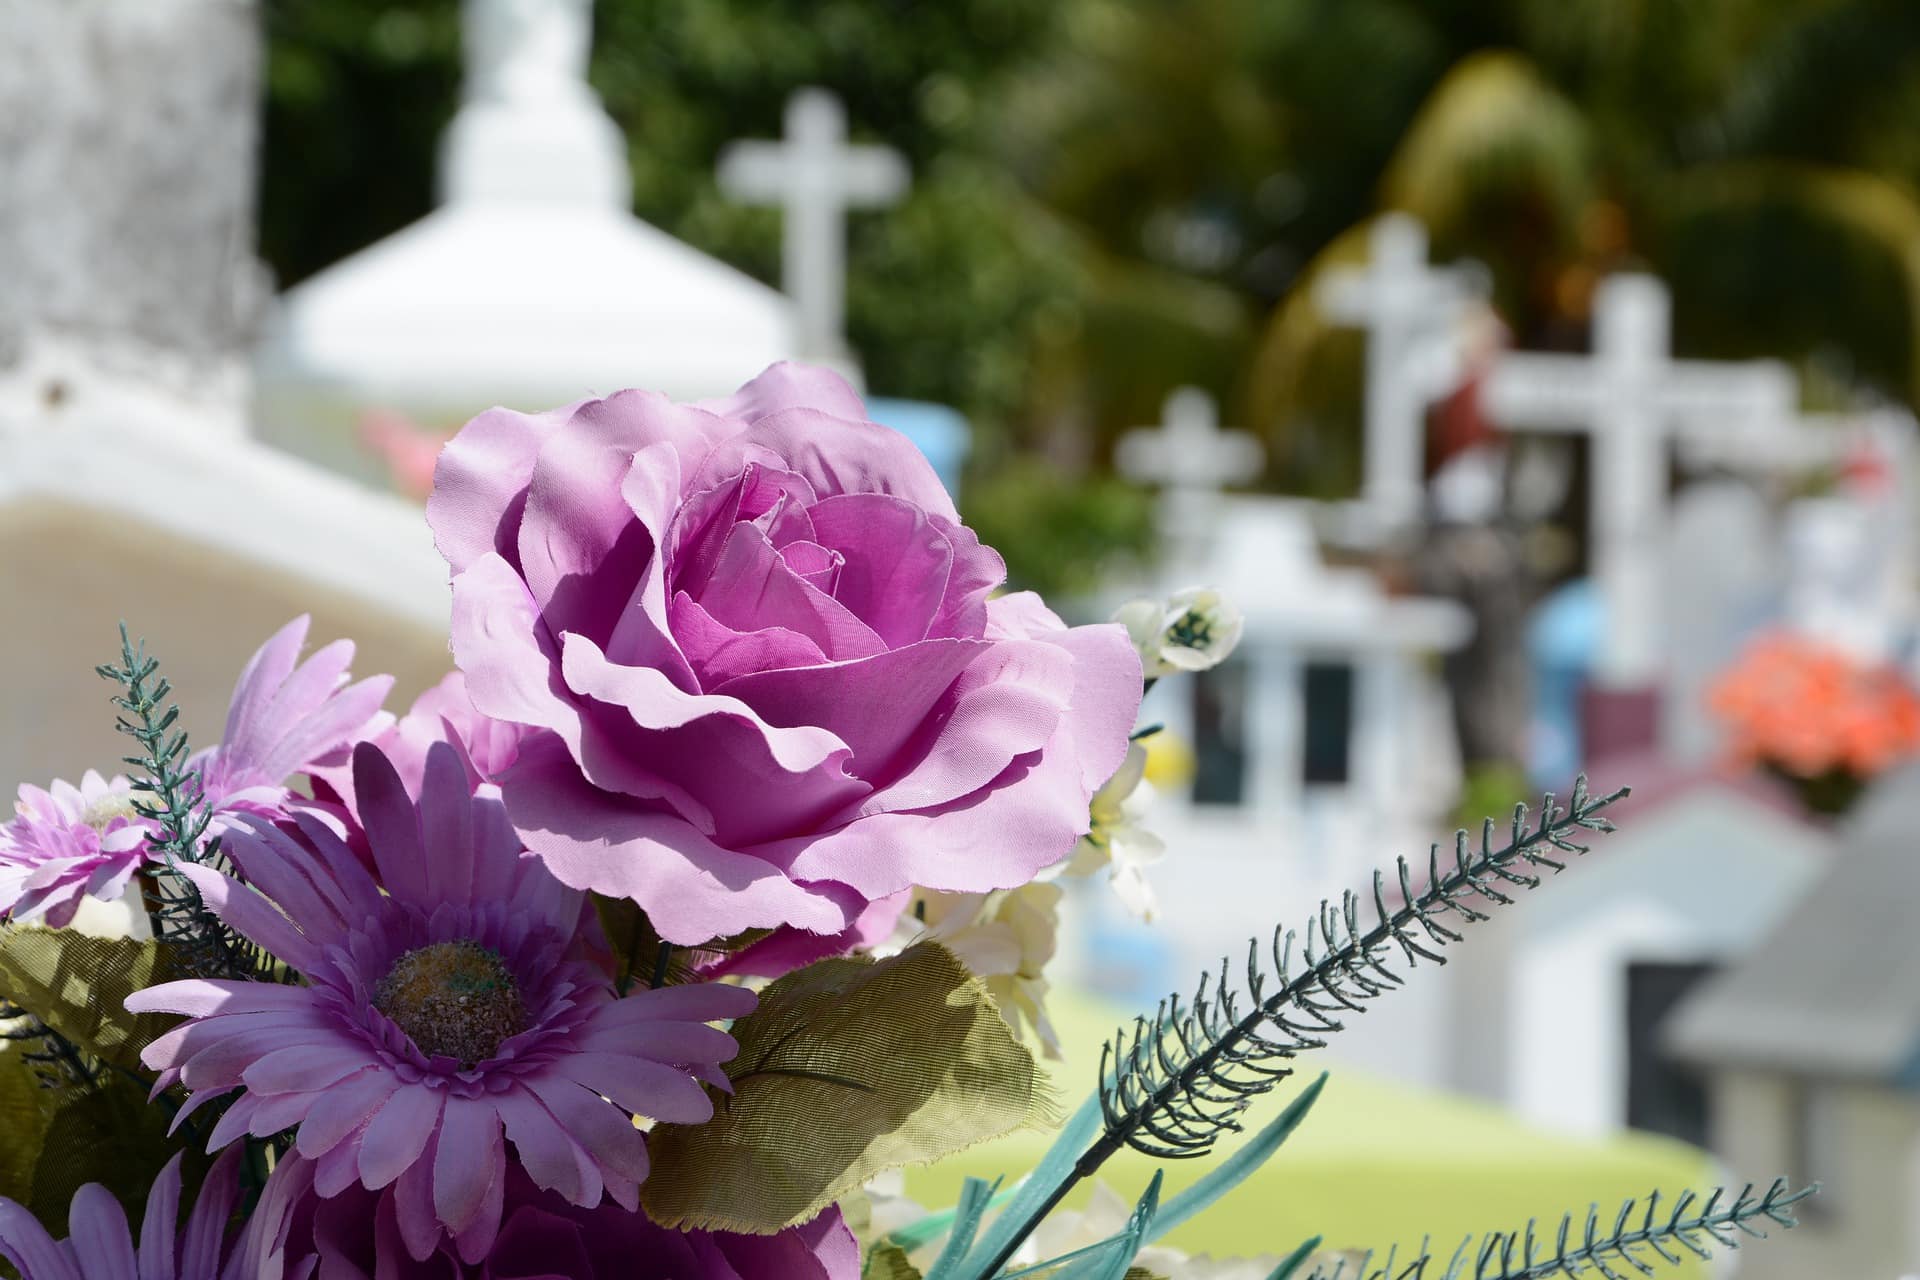 finding a wrongful death lawyer